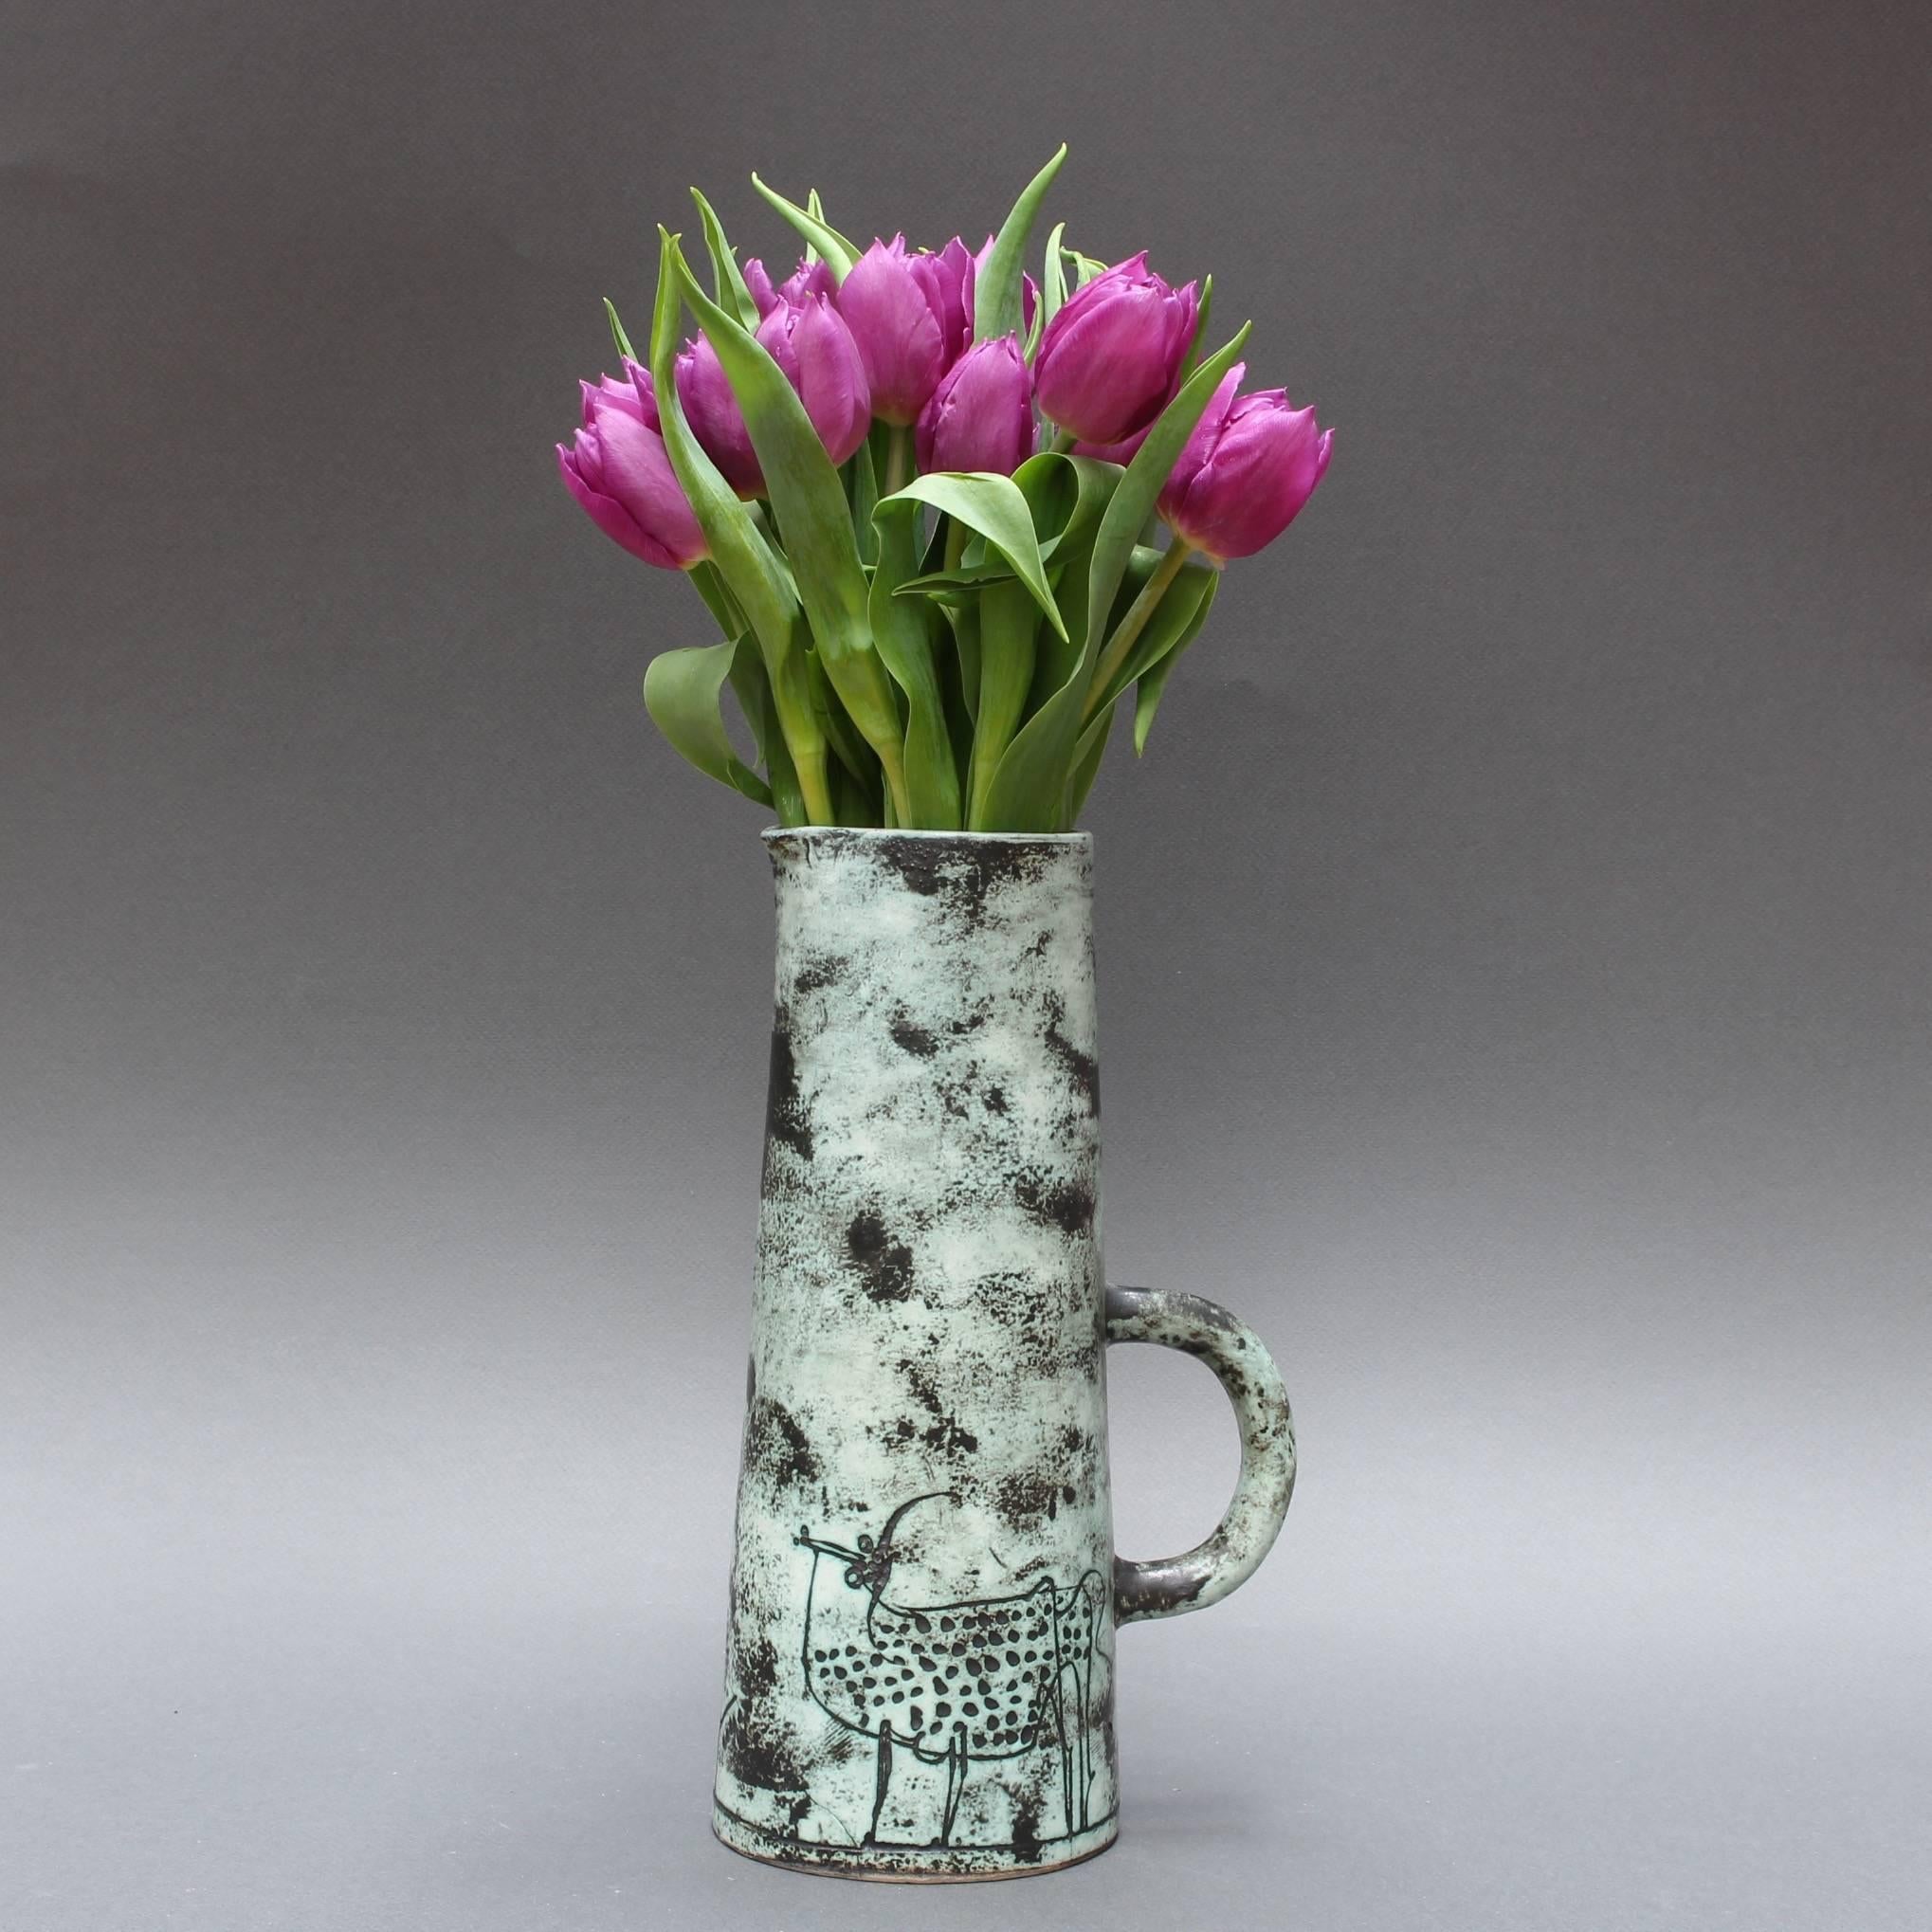 Mid-Century Modern Ceramic Pitcher by Jacques Blin, Vallauris, France, circa 1950s - 60s